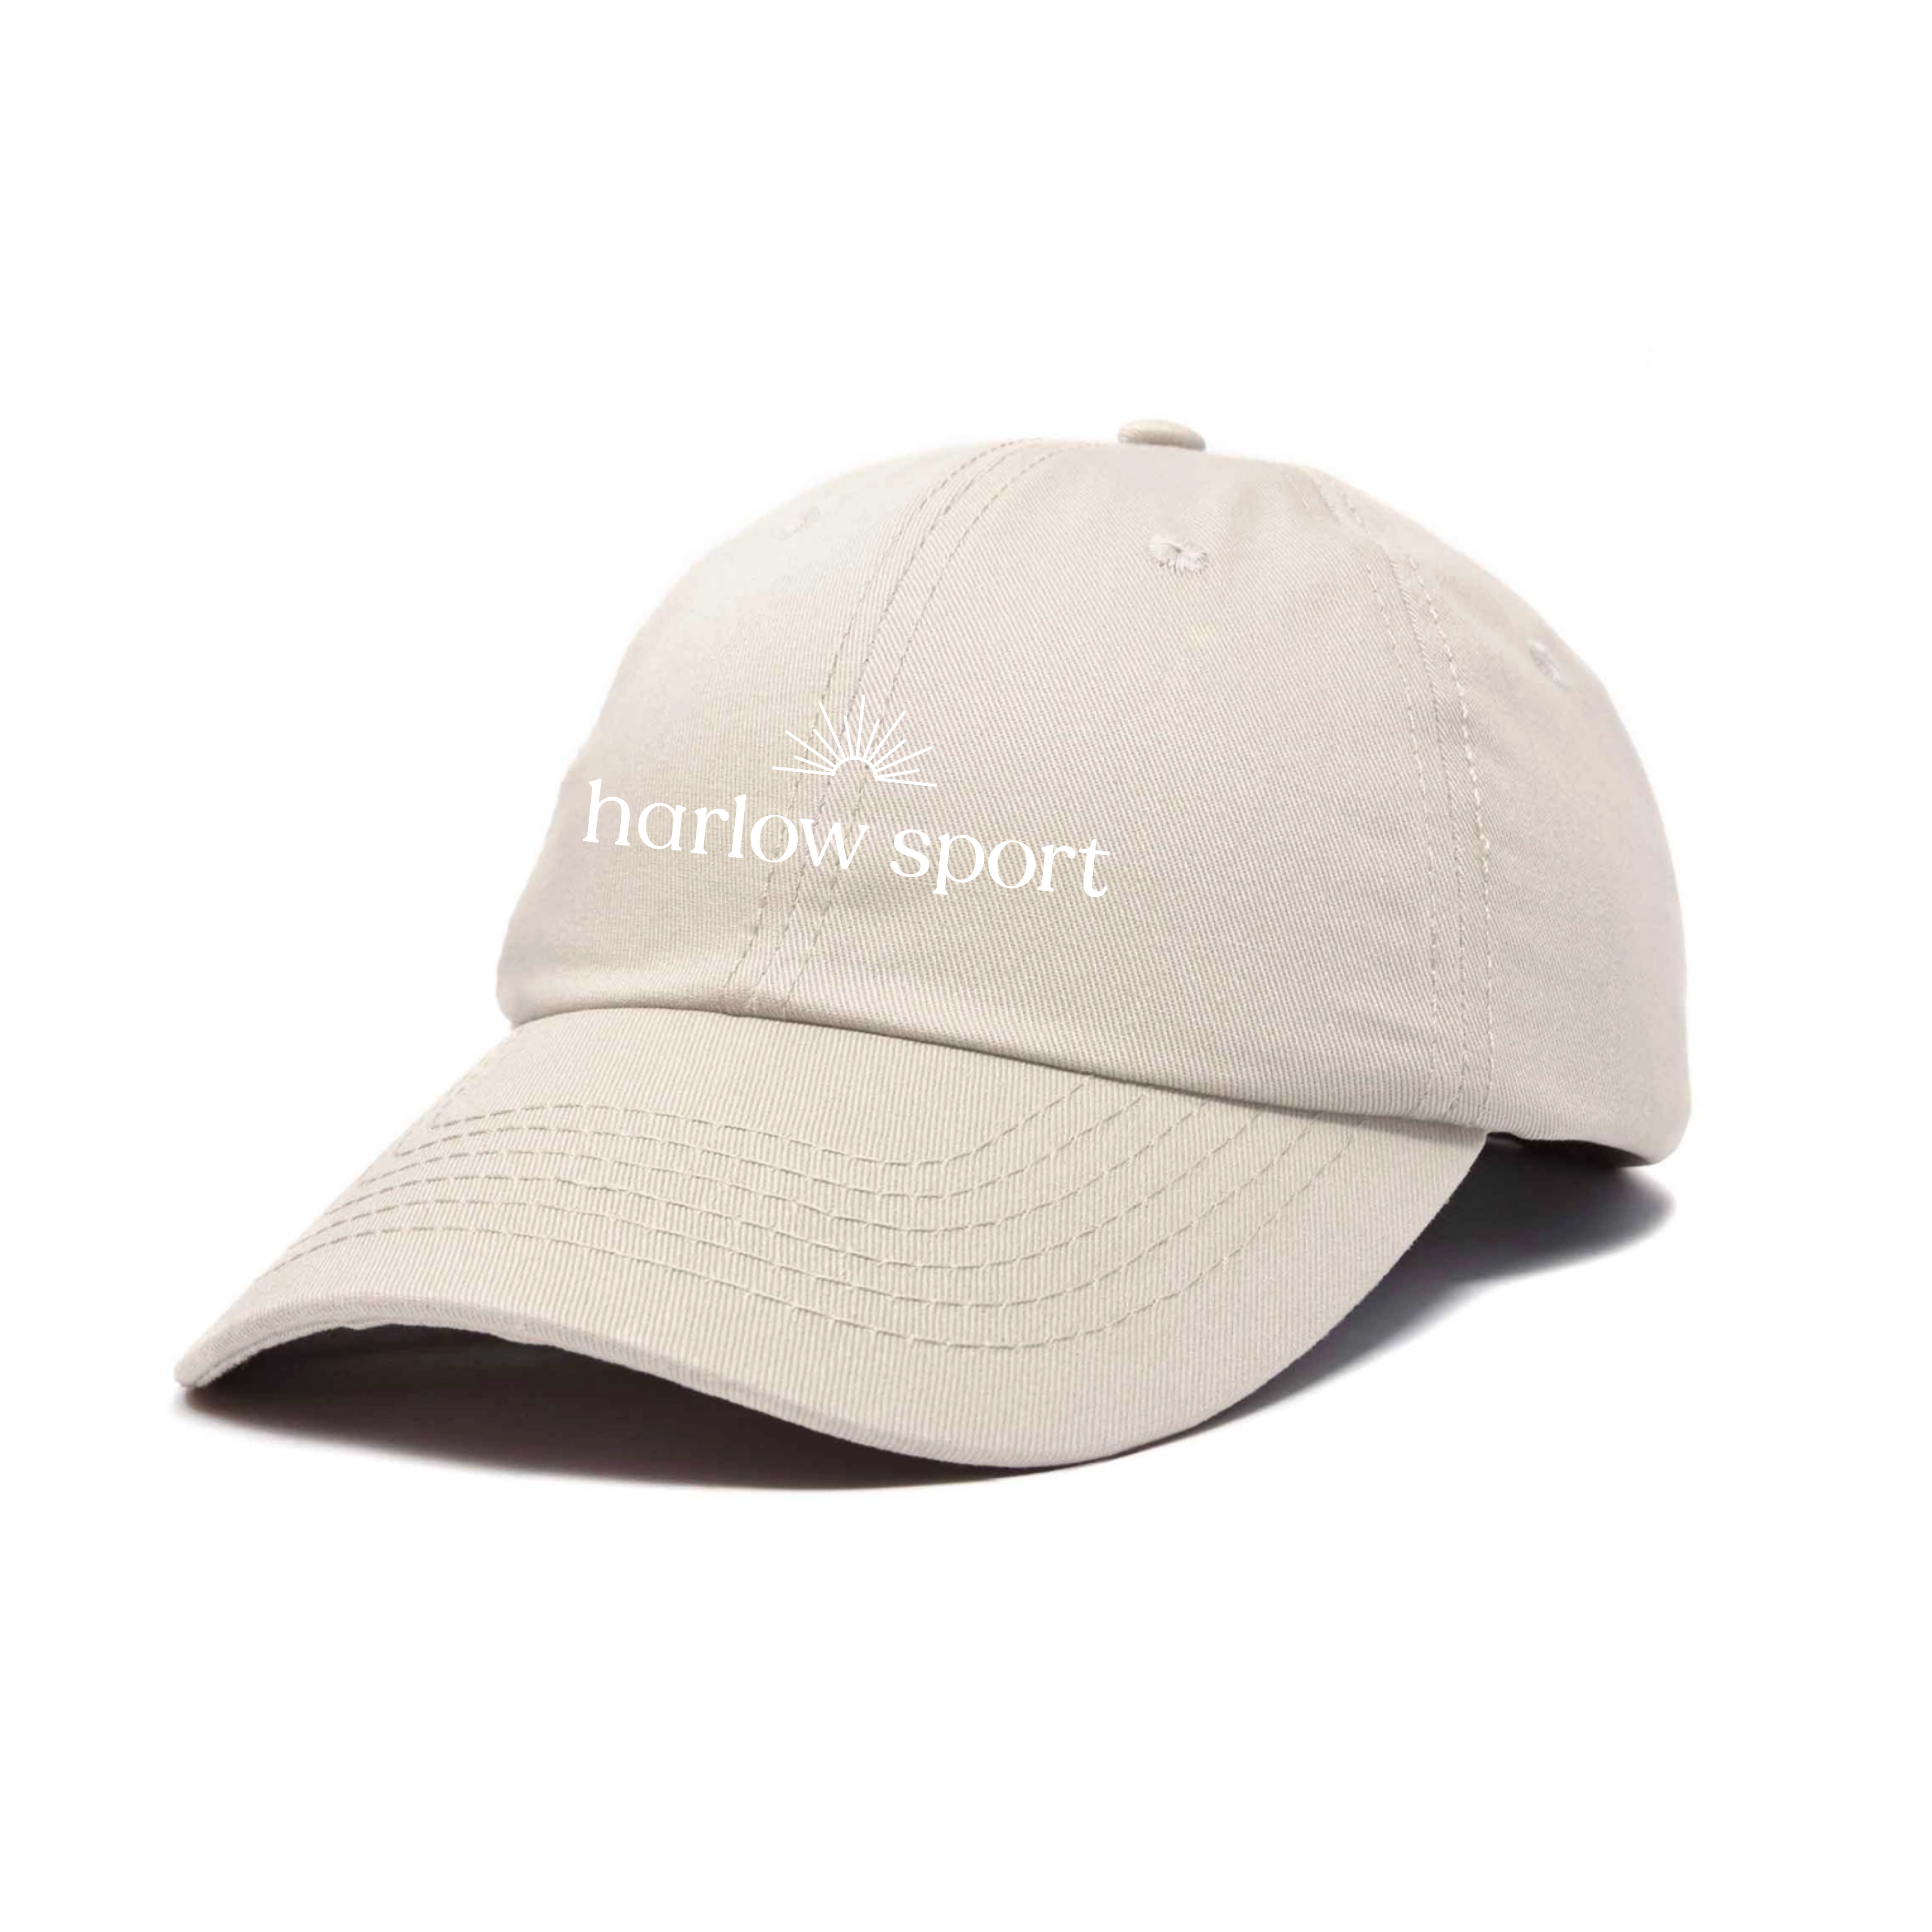 The Harlow Sport Hat